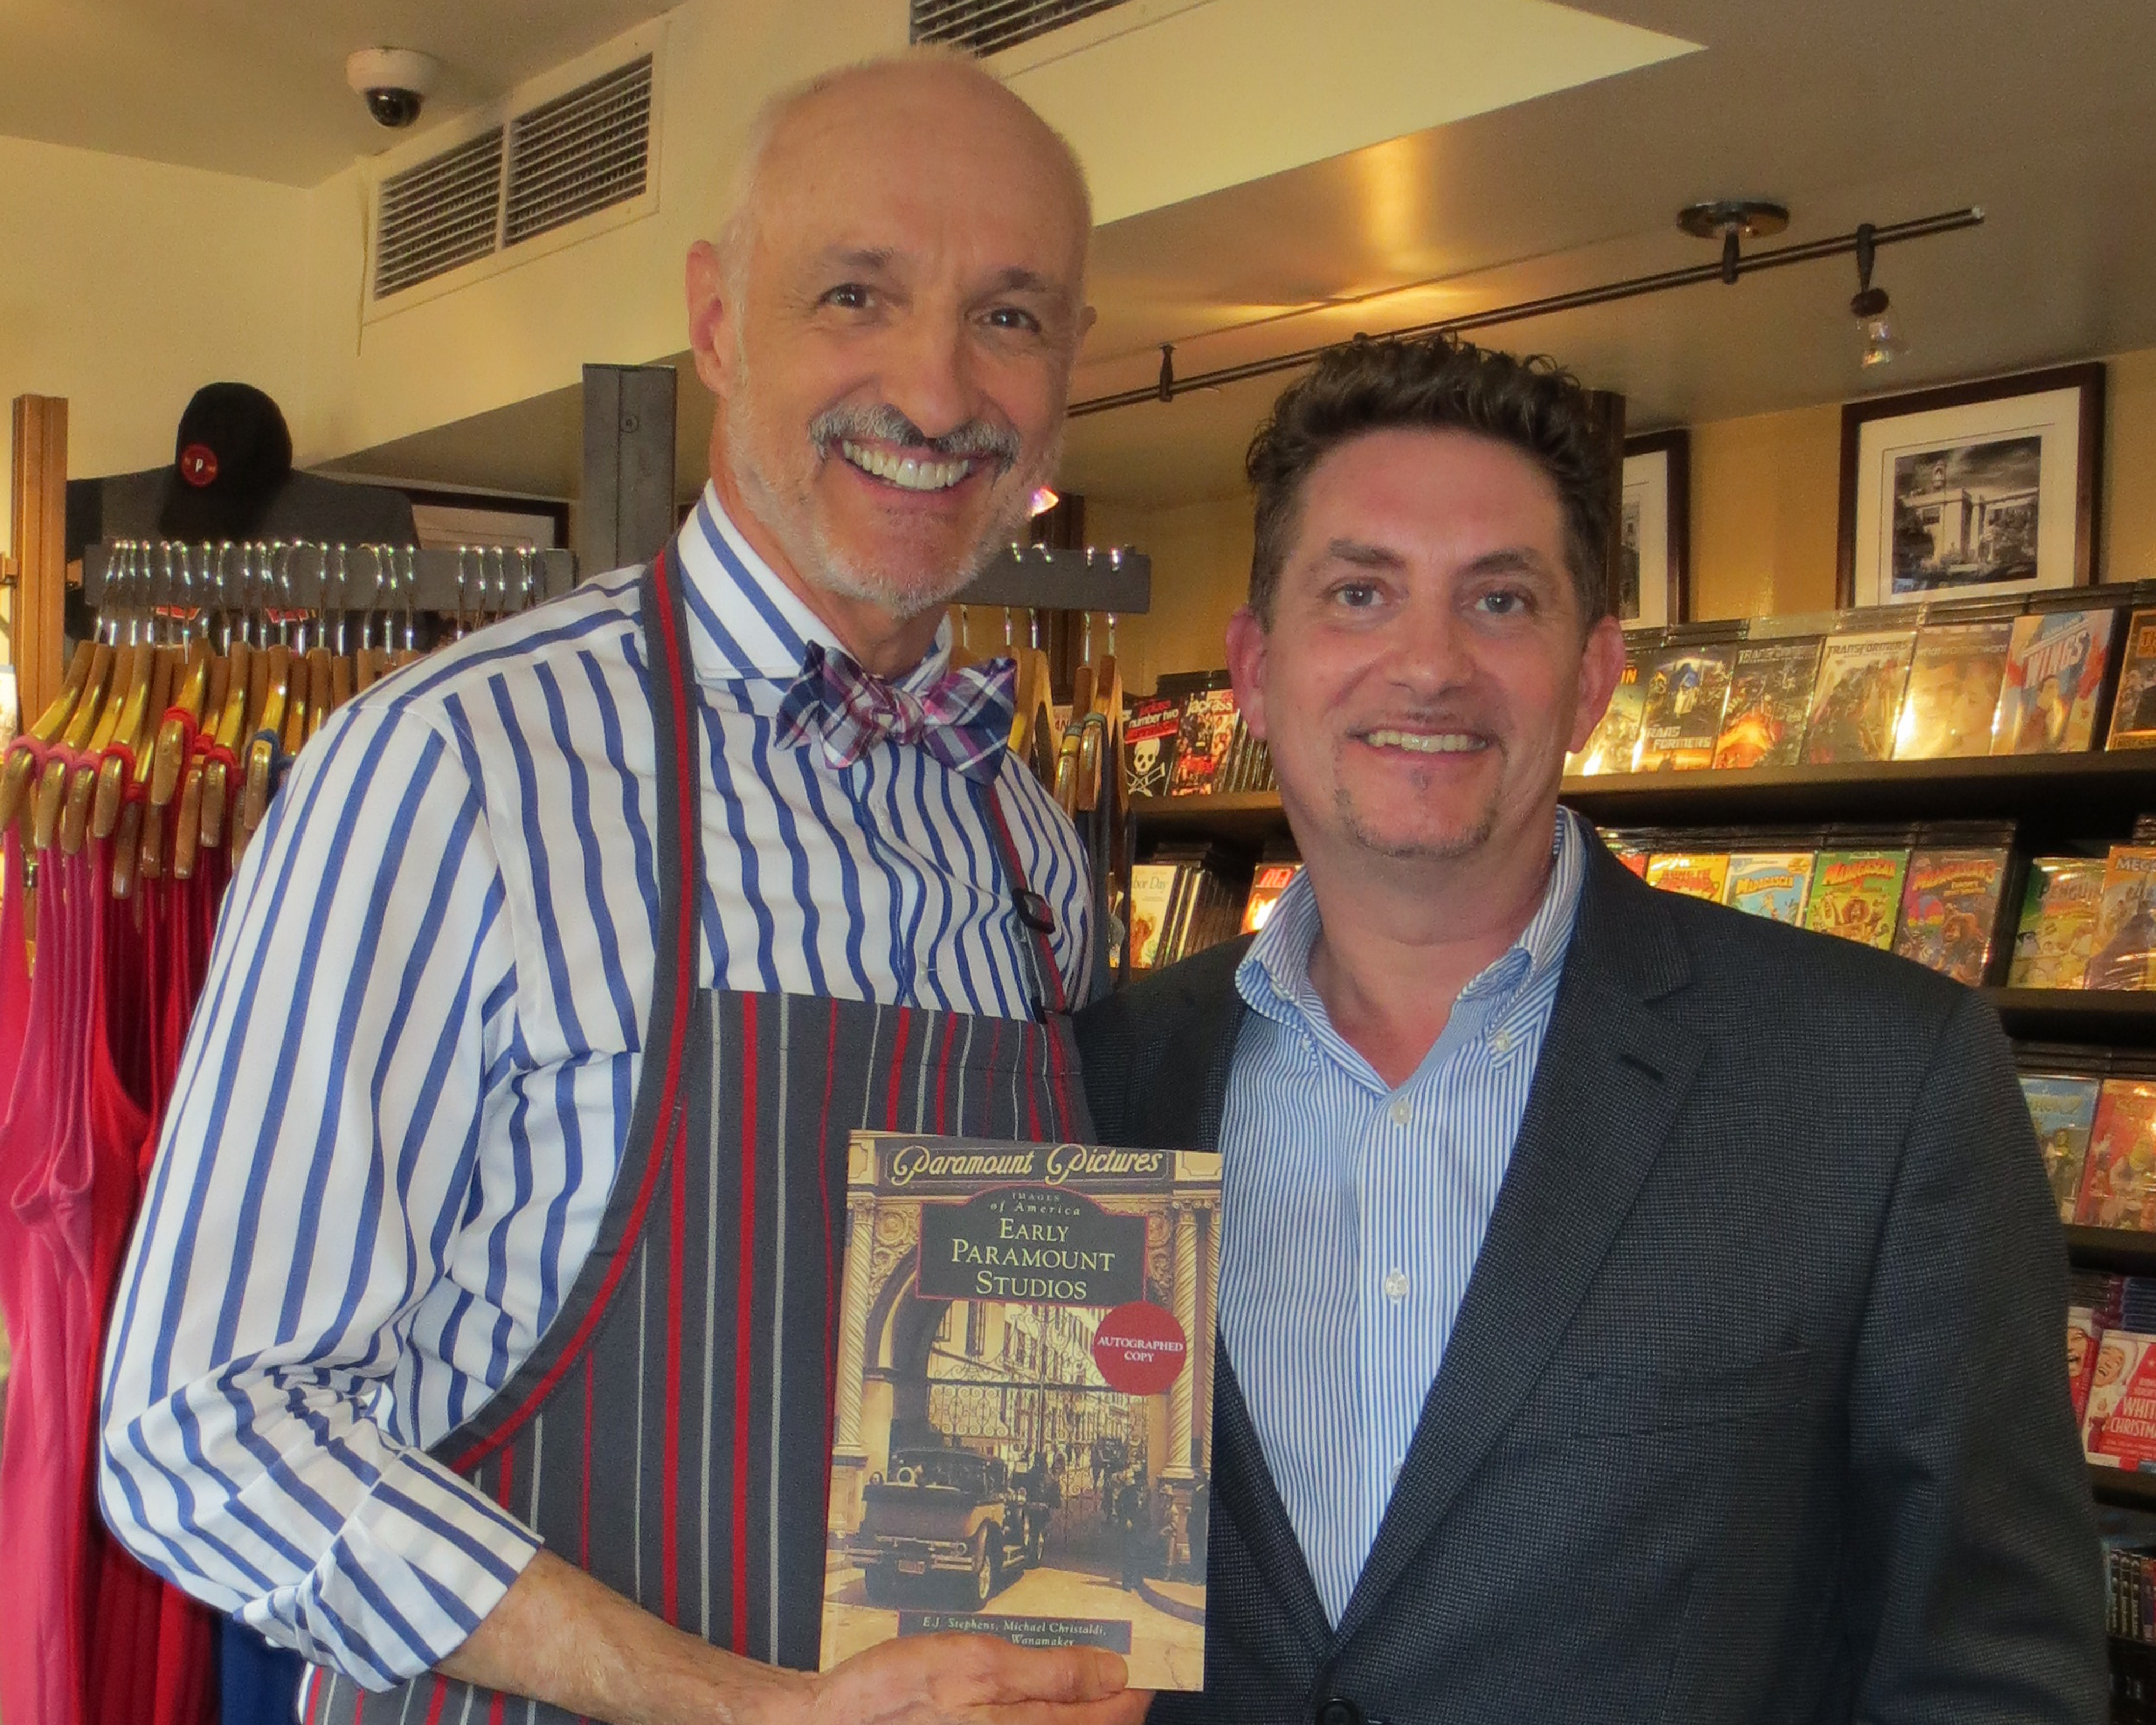 Michael Gross of the TV series Family Ties on a break from filming the new show Grace and Frankie in the Studio store at Paramount Pictures buying a copy of Early Paramount Studios when he runs into the books author Michael Christaldi.